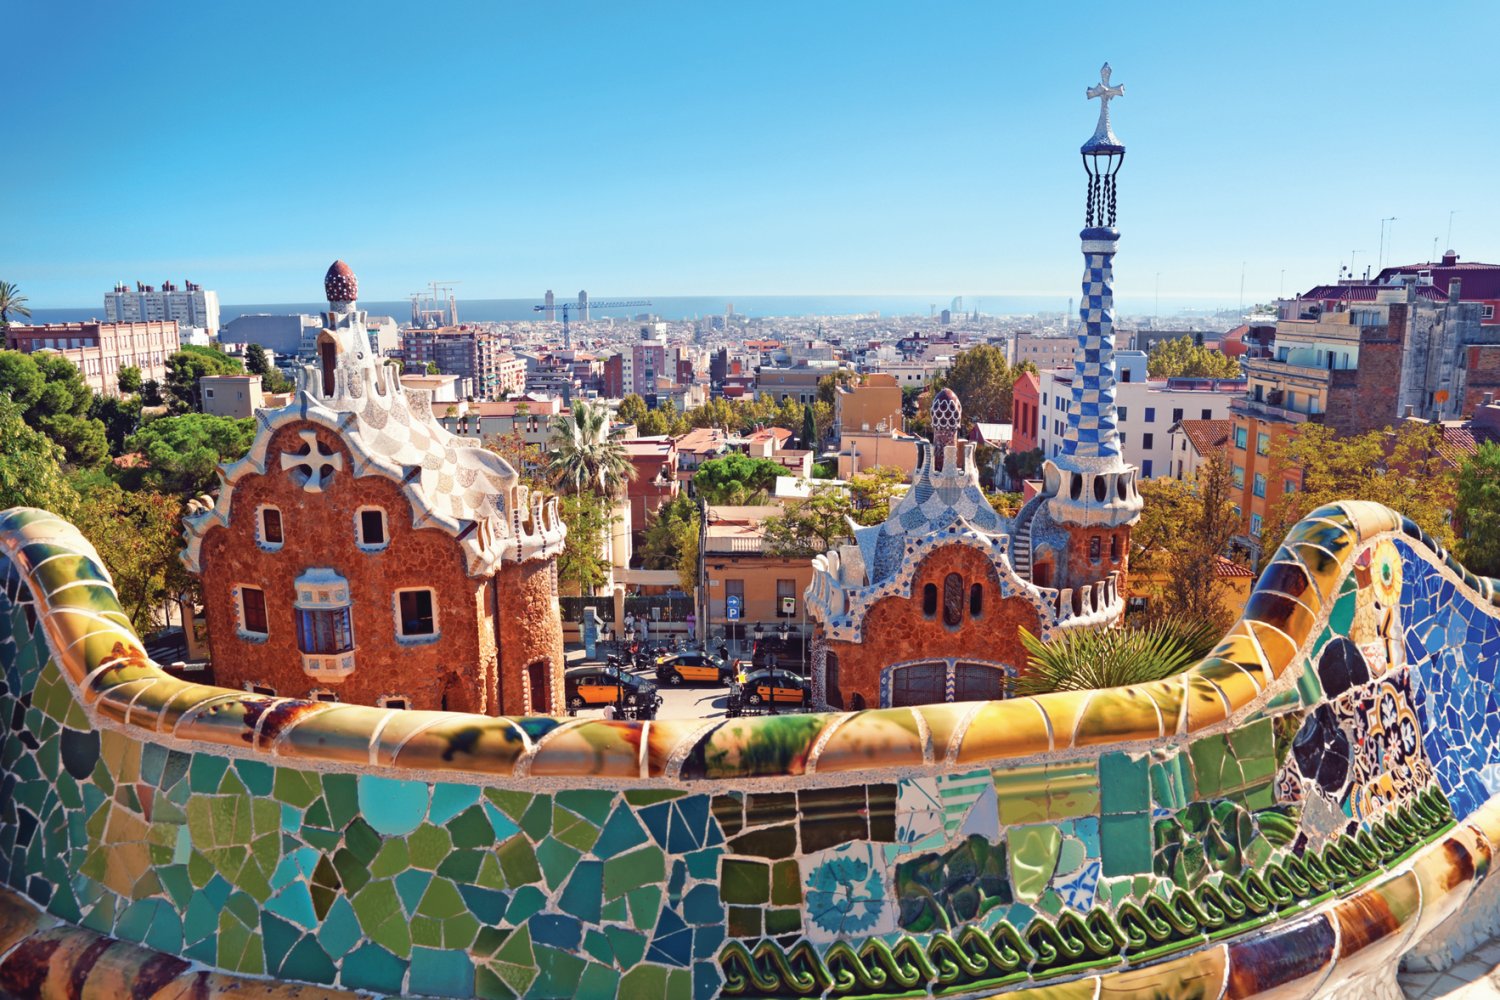 Historical sites in Spain, Park Guell, Gaudi, Barcelona